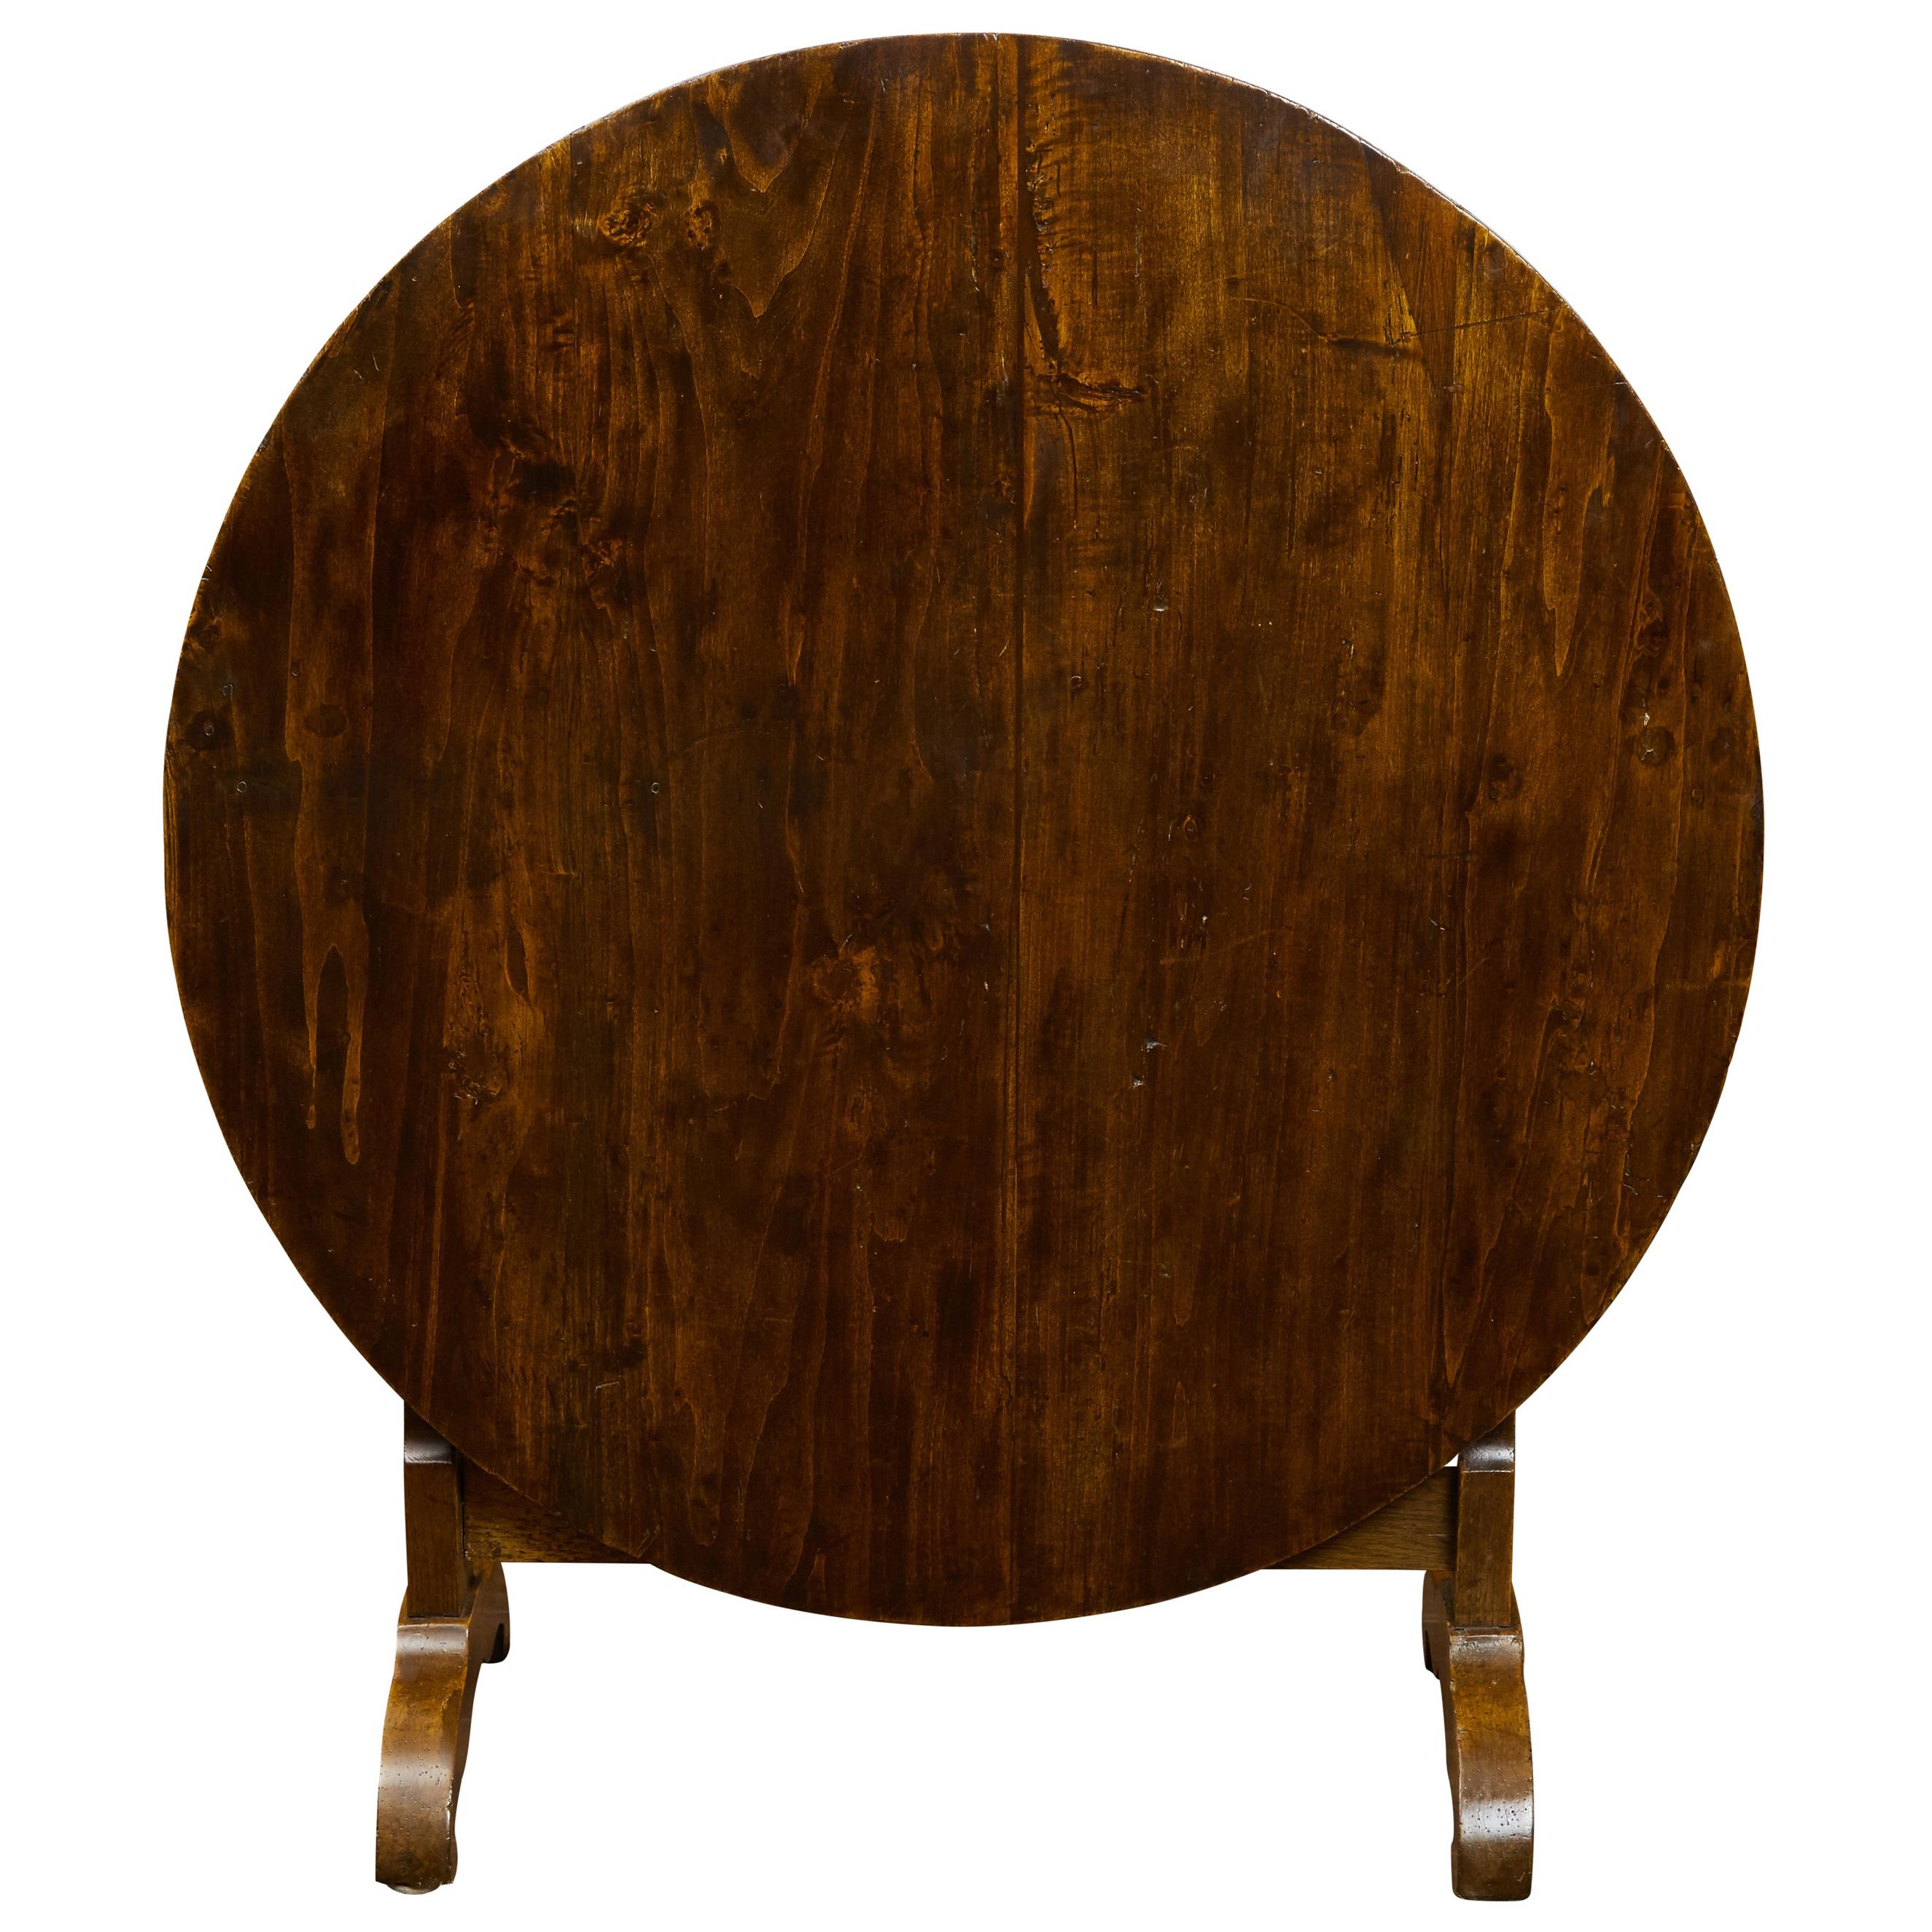 French 1880s Pine Wine Tasting Tilt-Top Table with Circular Top and Dark Patina